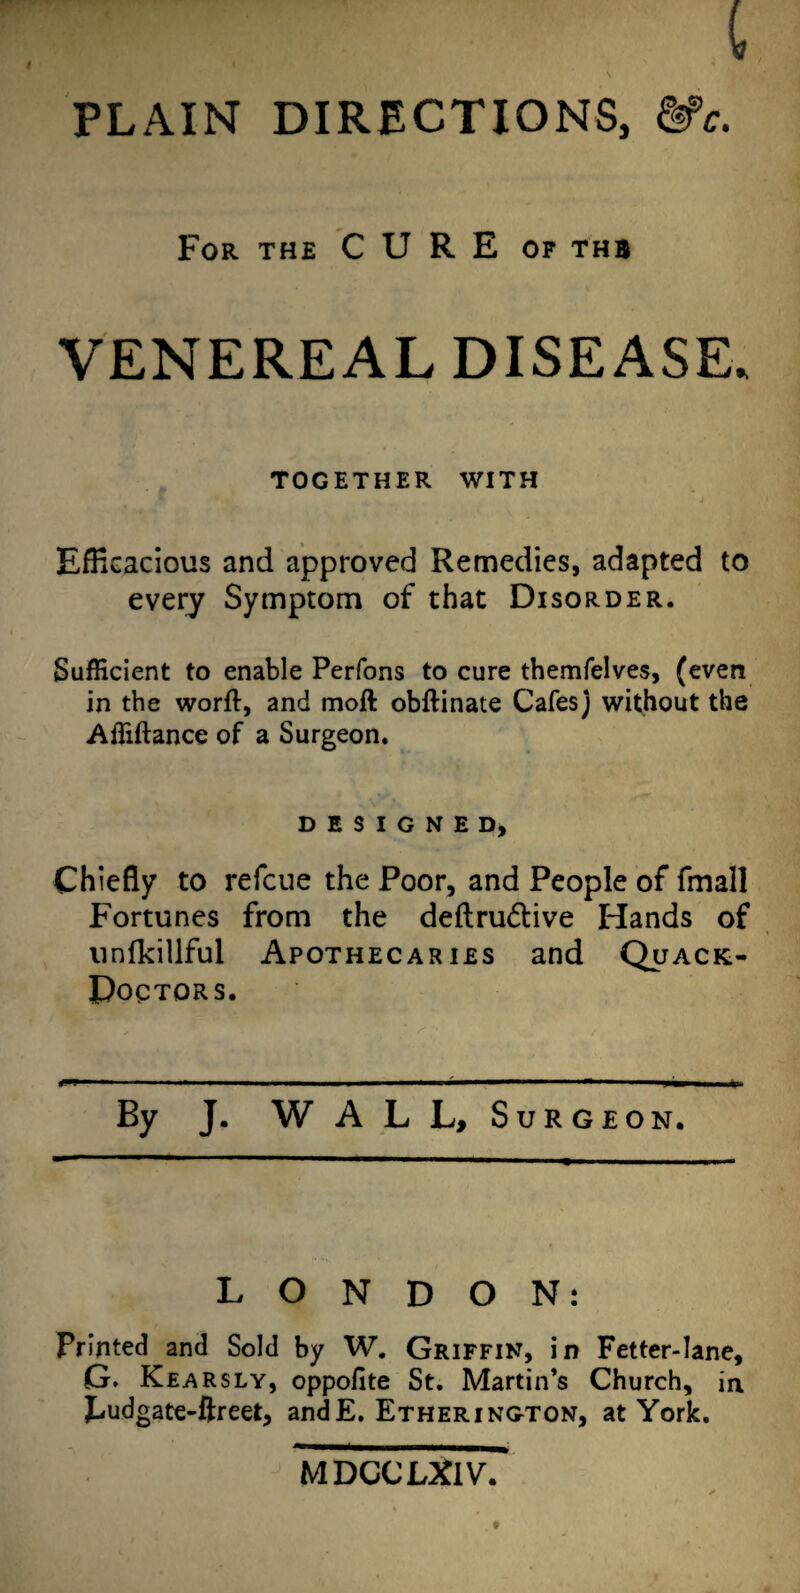 For the CURE of thb VENEREAL DISEASE. TOGETHER WITH Efficacious and approved Remedies, adapted to every Symptom of that Disorder. Sufficient to enable Perfons to cure themfelves, (even in the worfl, and moll obftinate Cafes) without the Affiftance of a Surgeon. DESIGNED, Chiefly to refcue the Poor, and People of fmall Fortunes from the deftru&ive Hands of nnfkillful Apothecaries and Quack- Doctors. By J. W A L L, Surgeon. LONDON: Printed and Sold by W. Griffin, in Fetter-lane, G. Kearsly, oppofite St. Martin’s Church, in piudgate-ftreet, andE. Etherington, at York. MDCCUflV.